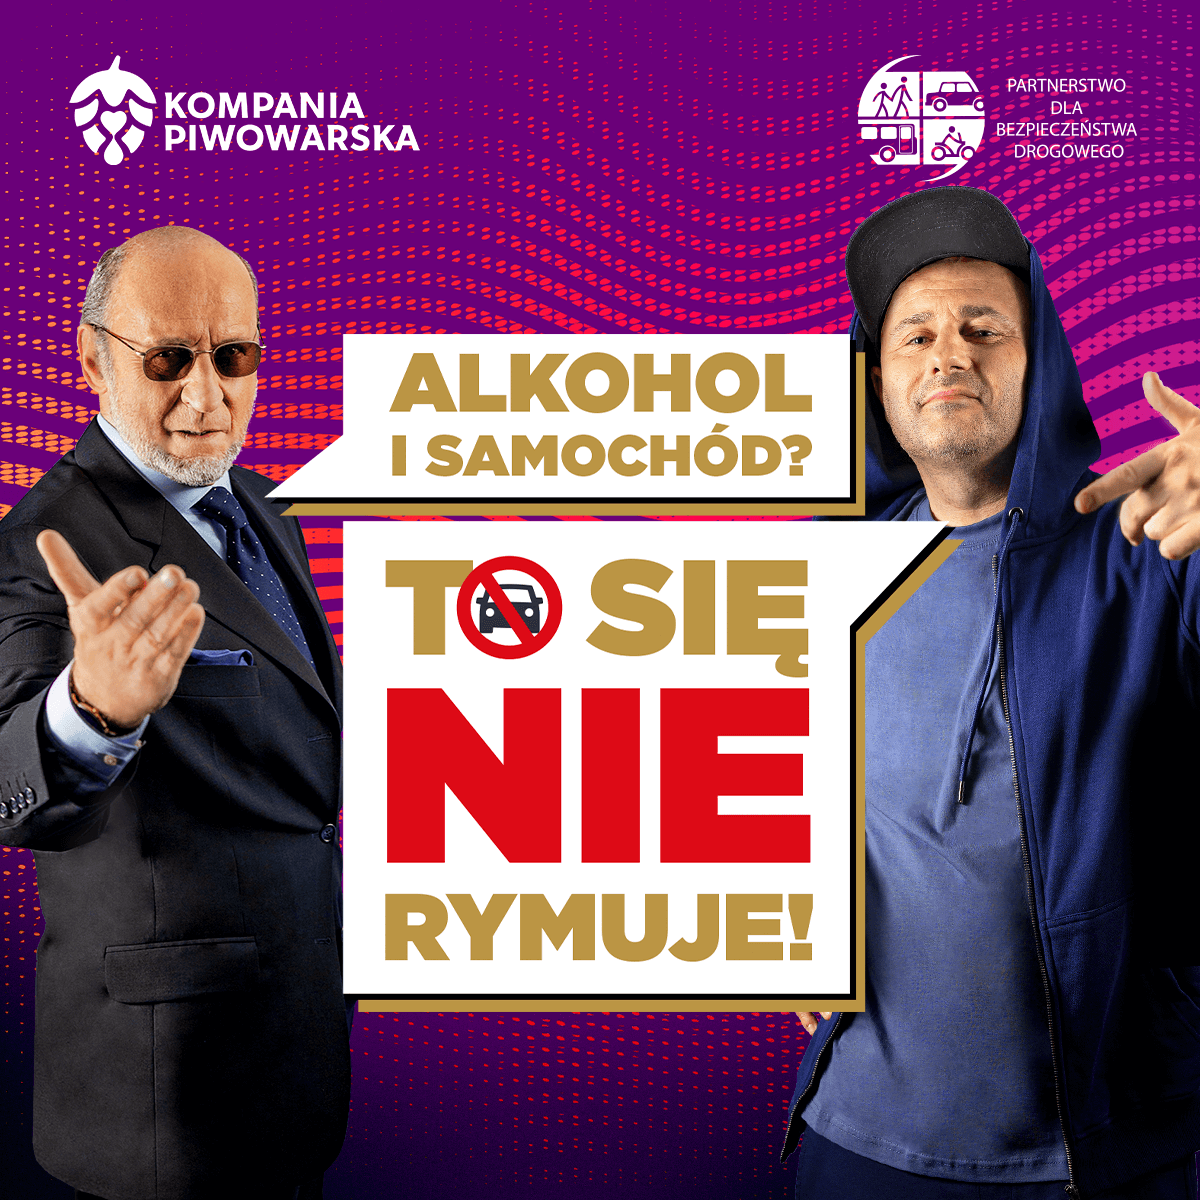 “Alcohol and car? That doesn’t rhyme!” – Kompania Piwowarska launches its musical social campaign featuring Piotr Fronczewski and PIH